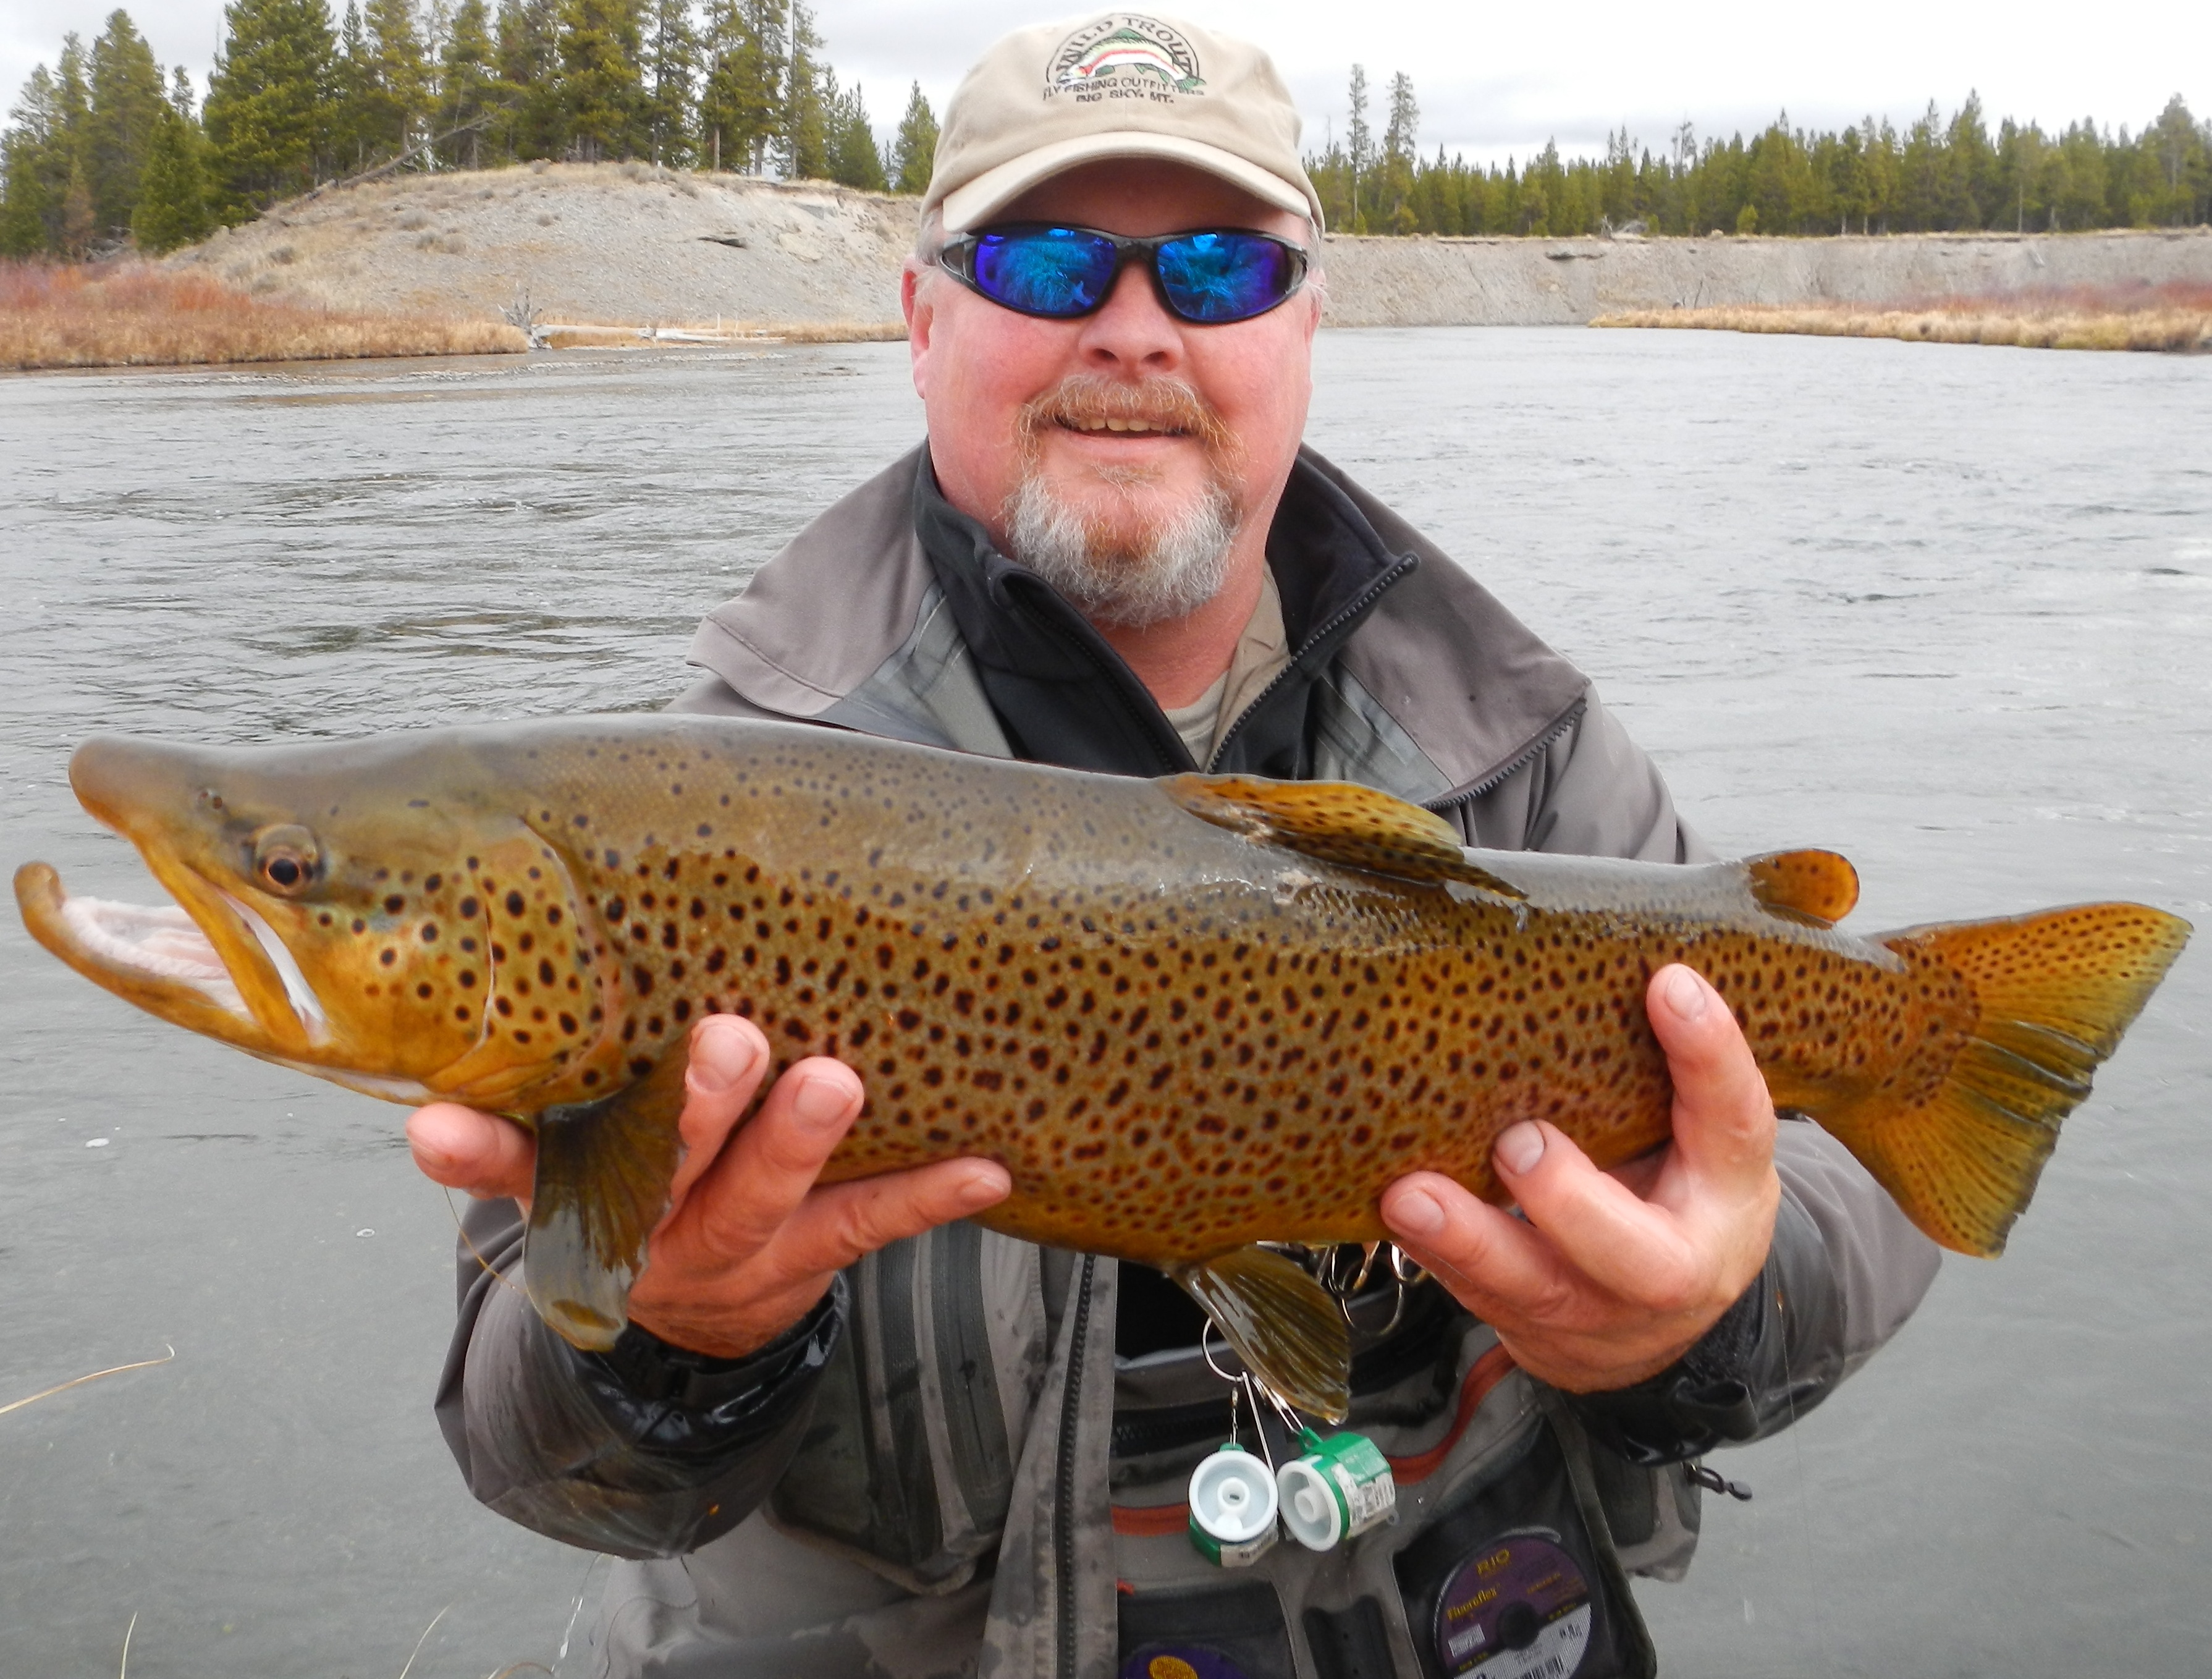 Wild Trout Outfitter Fishing The Madison River 10-30-2015. What a